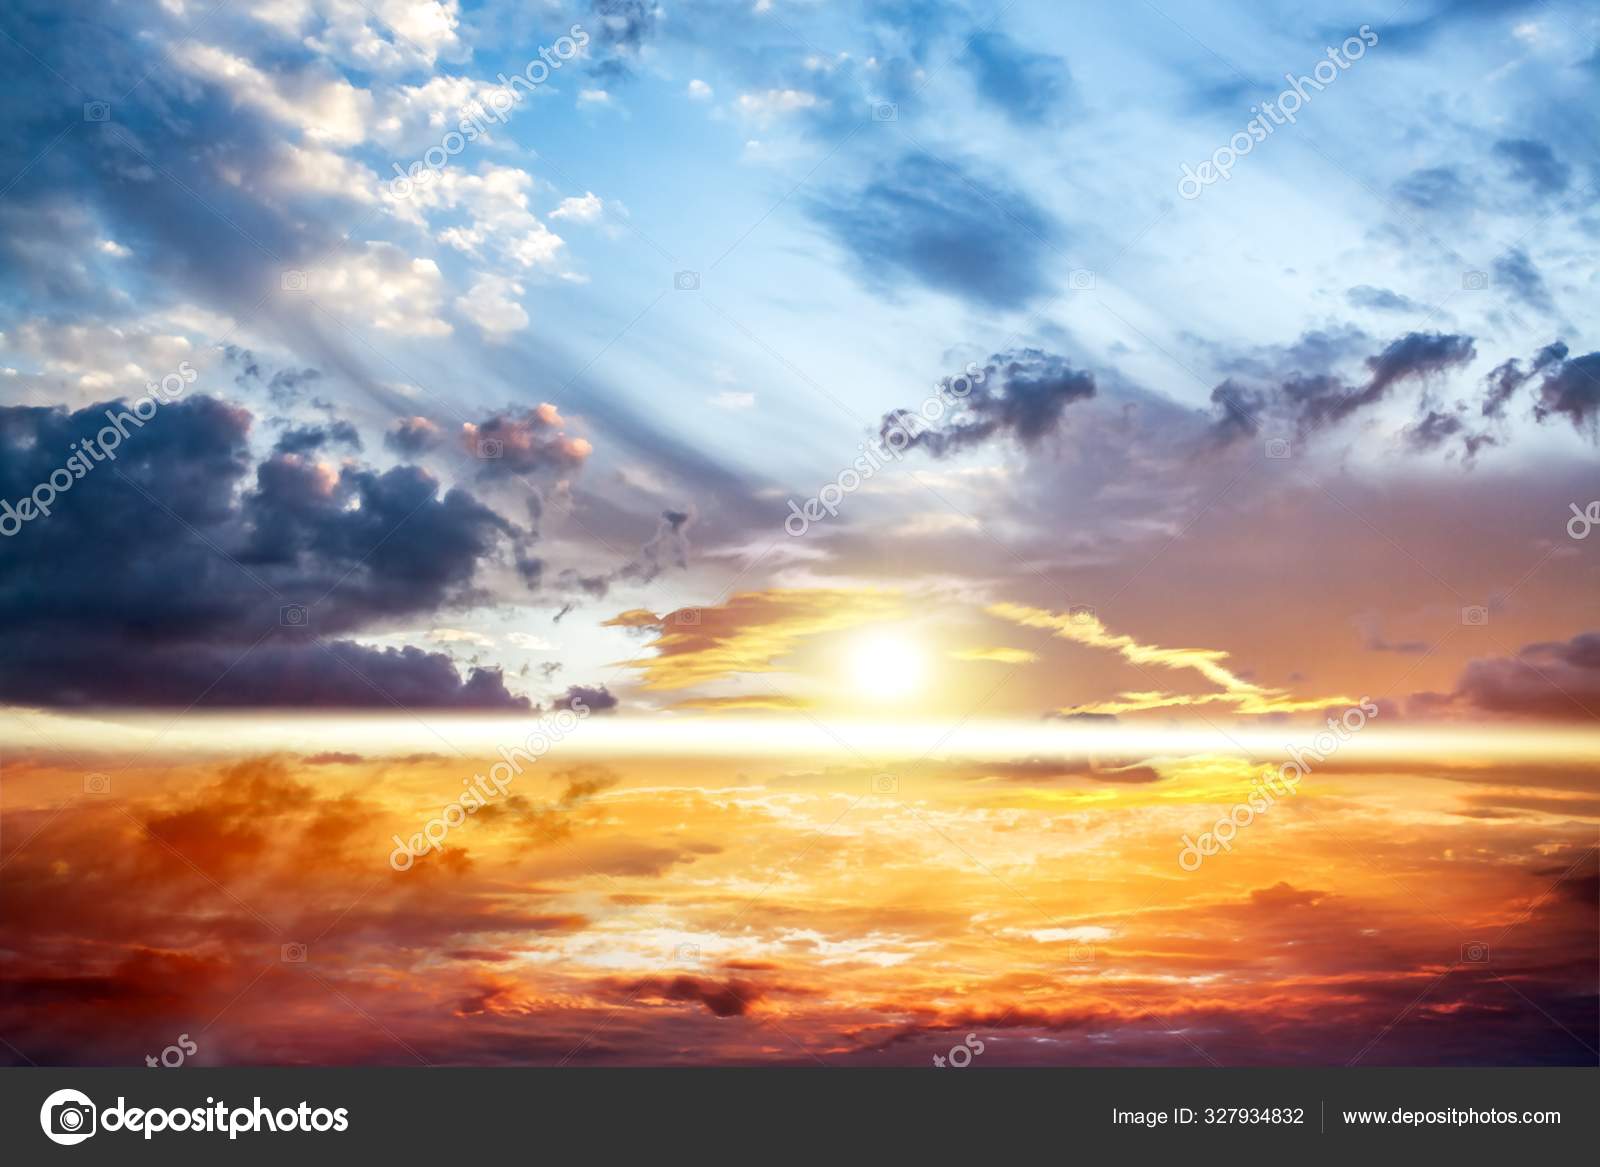 Sunset Heaven Abstract Big Explosion Light Sky Religion Background